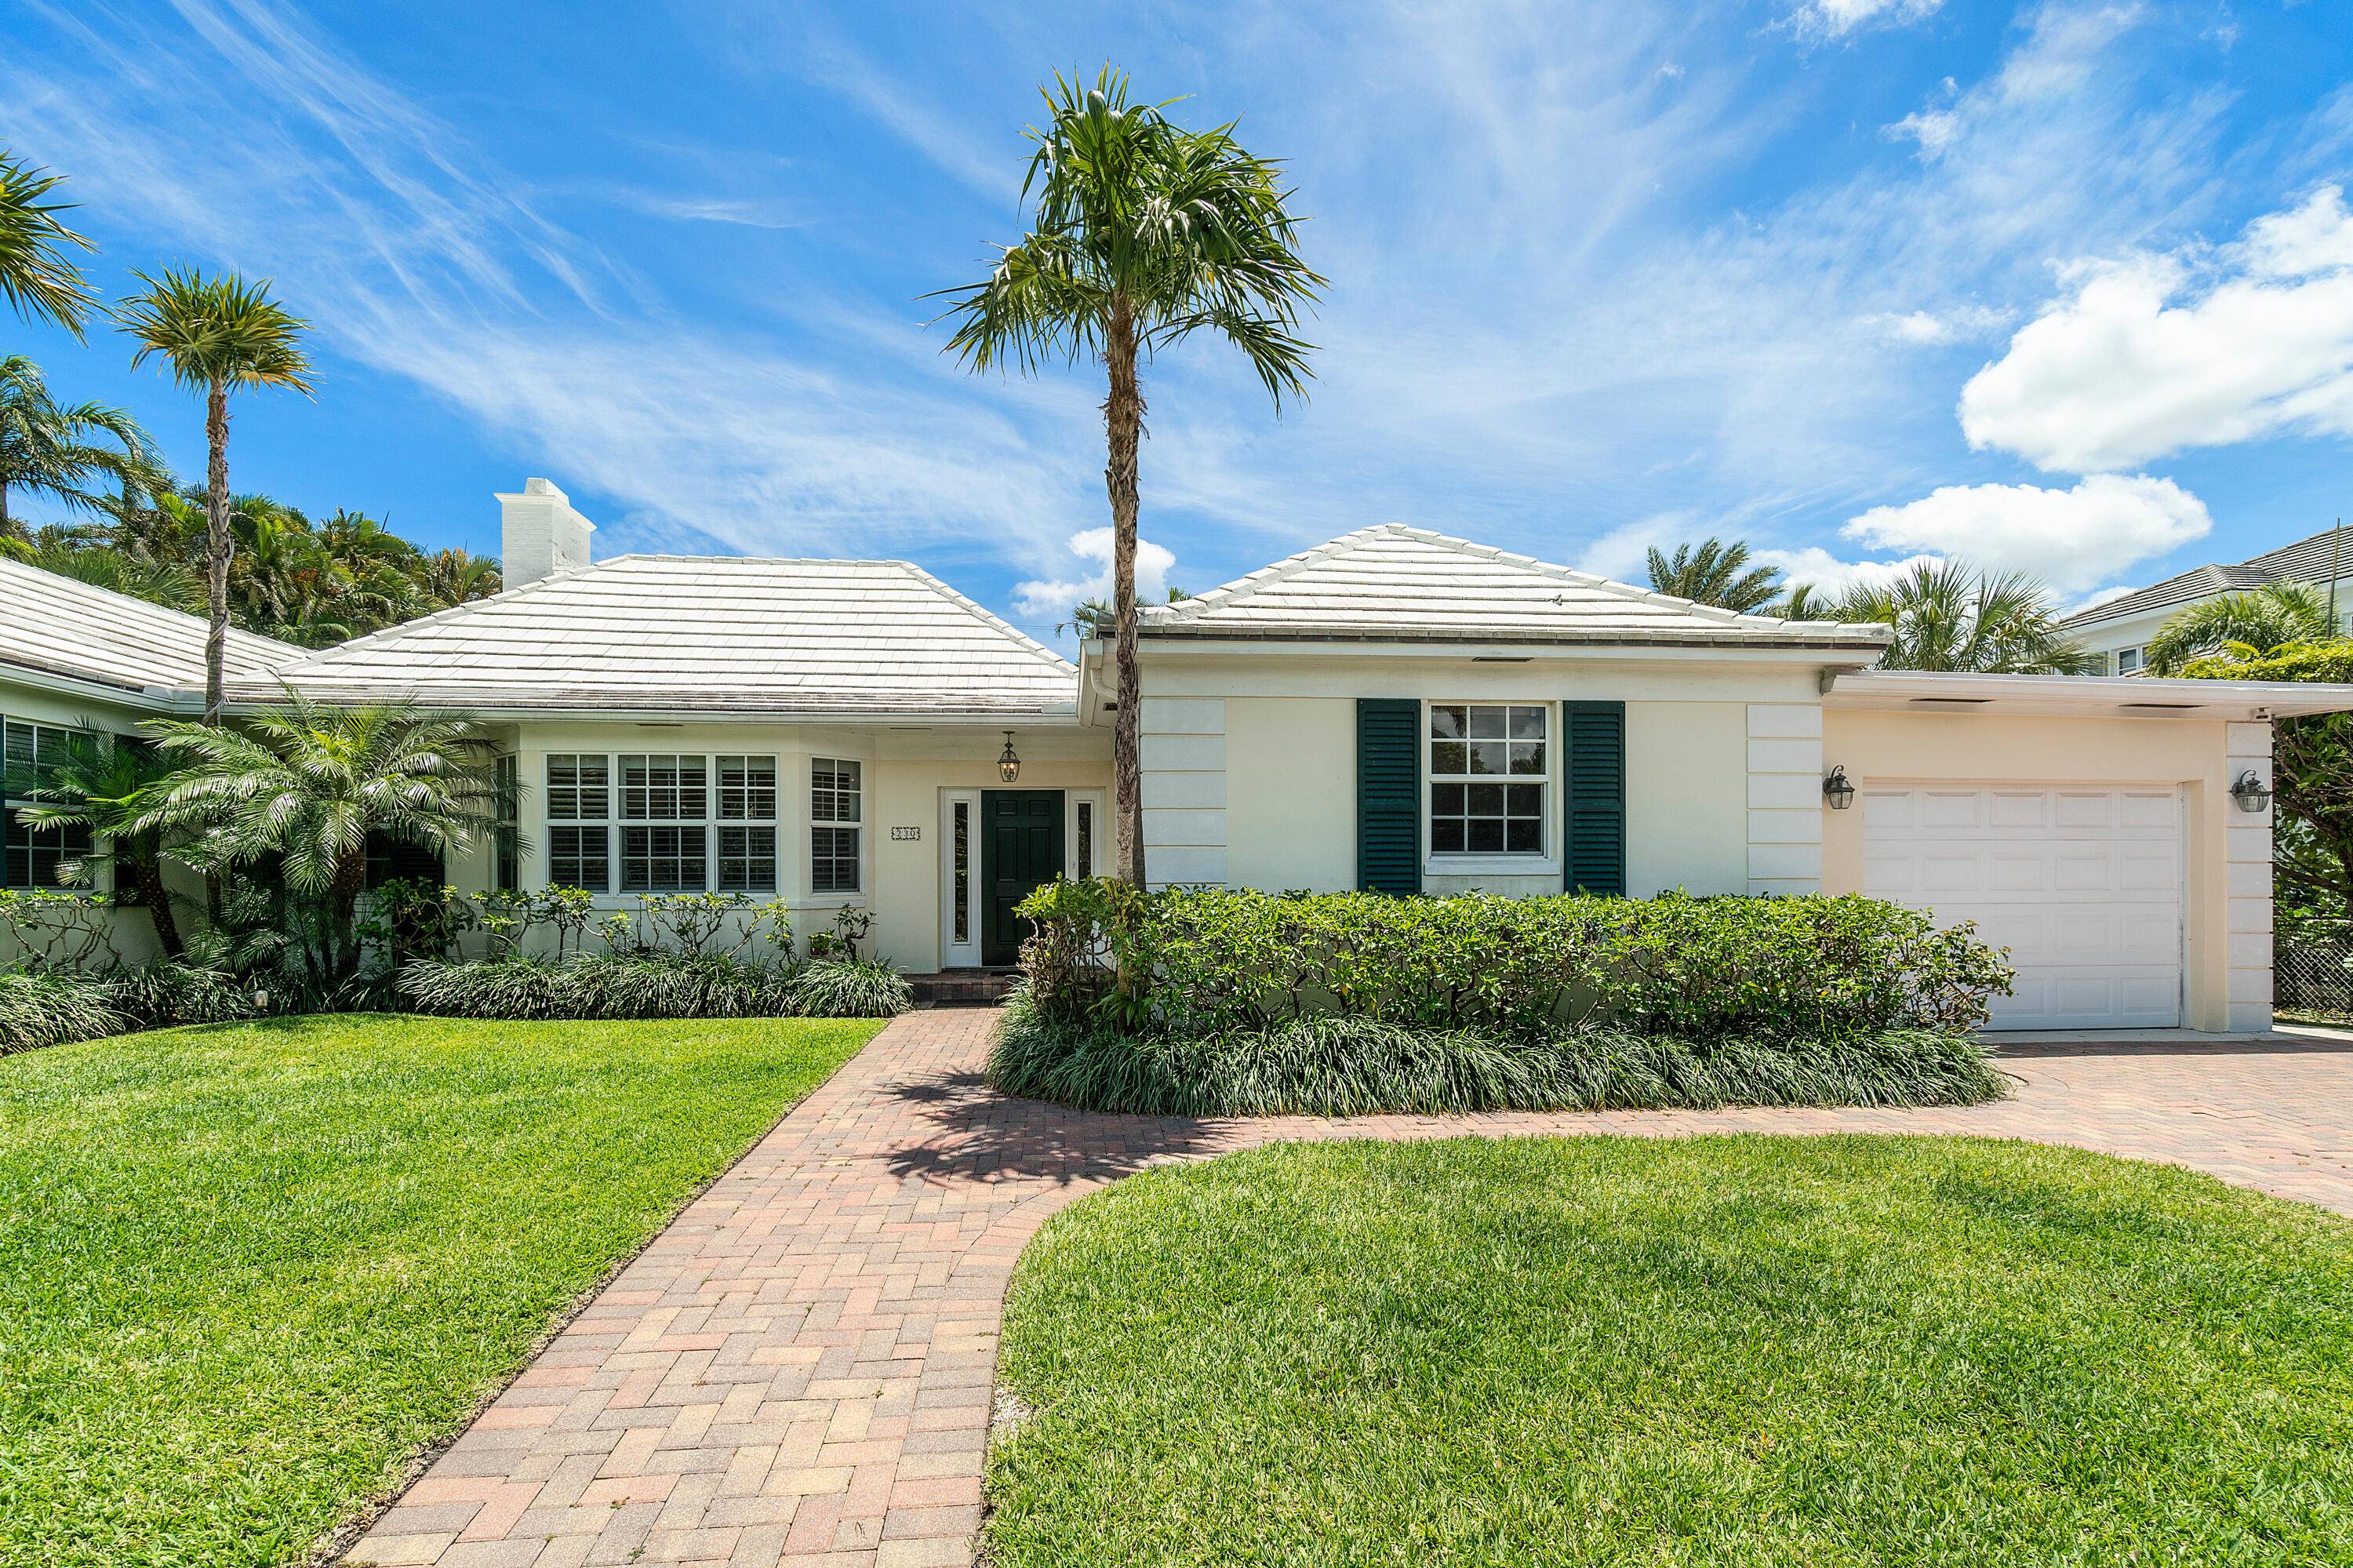 You will instantly relax in this charming beach house in the quiet north end of Palm Beach.